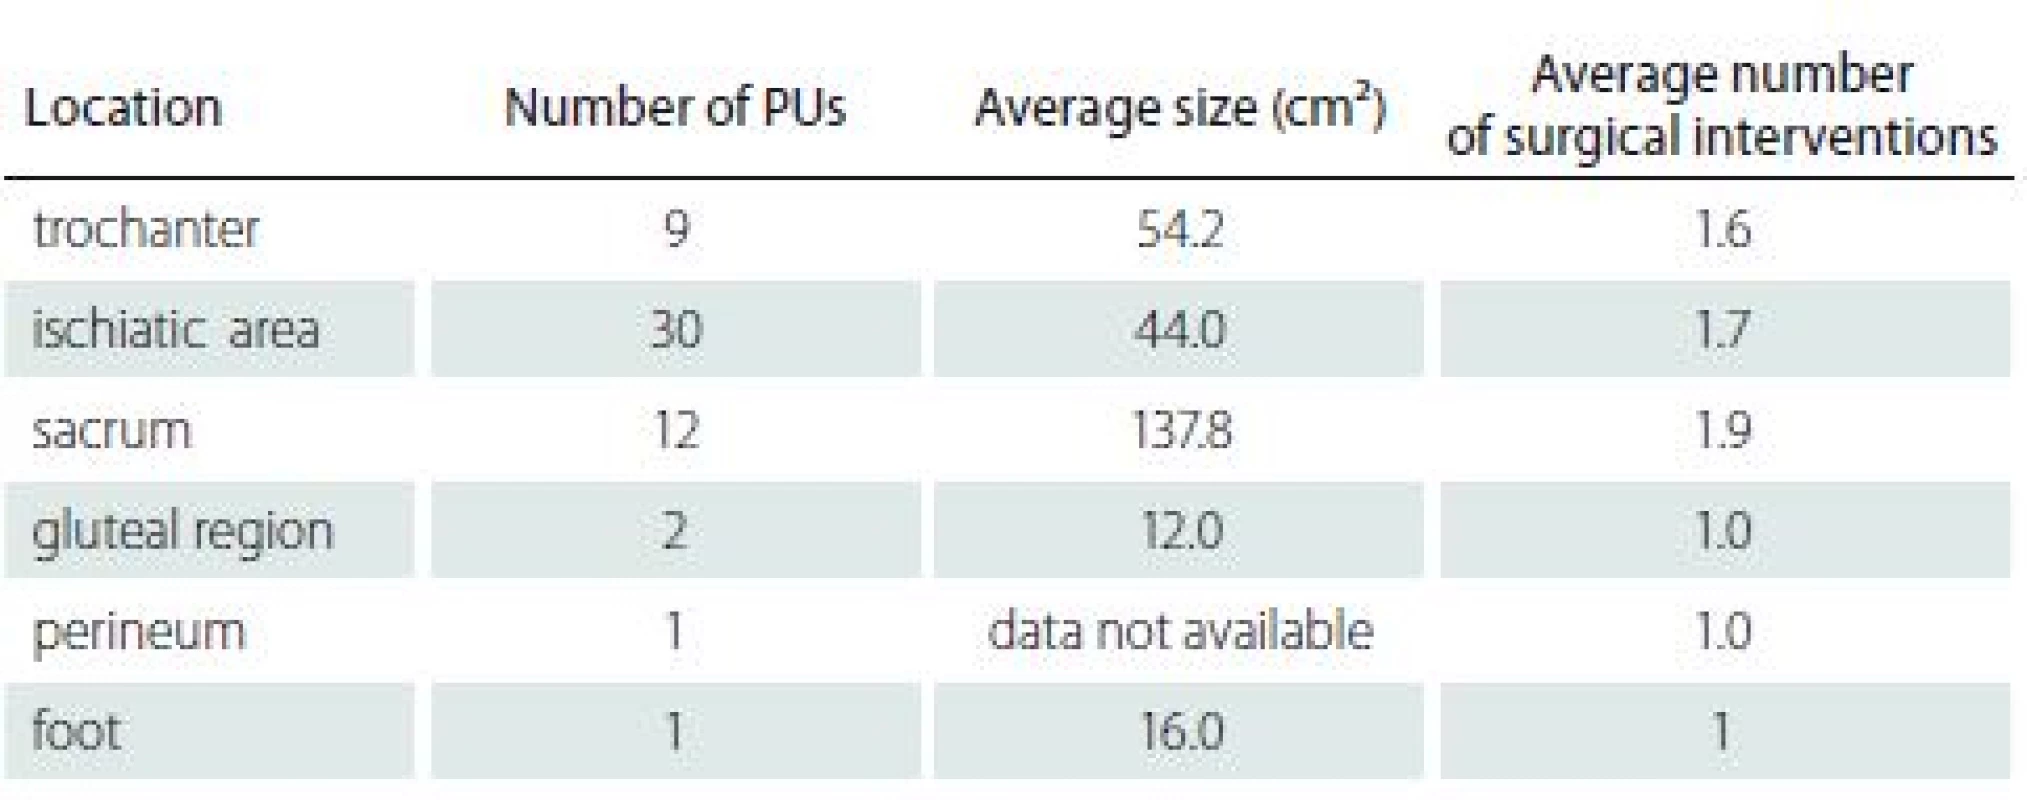 Overview of characteristics of PUs (number and size) according to location
(N = 55).